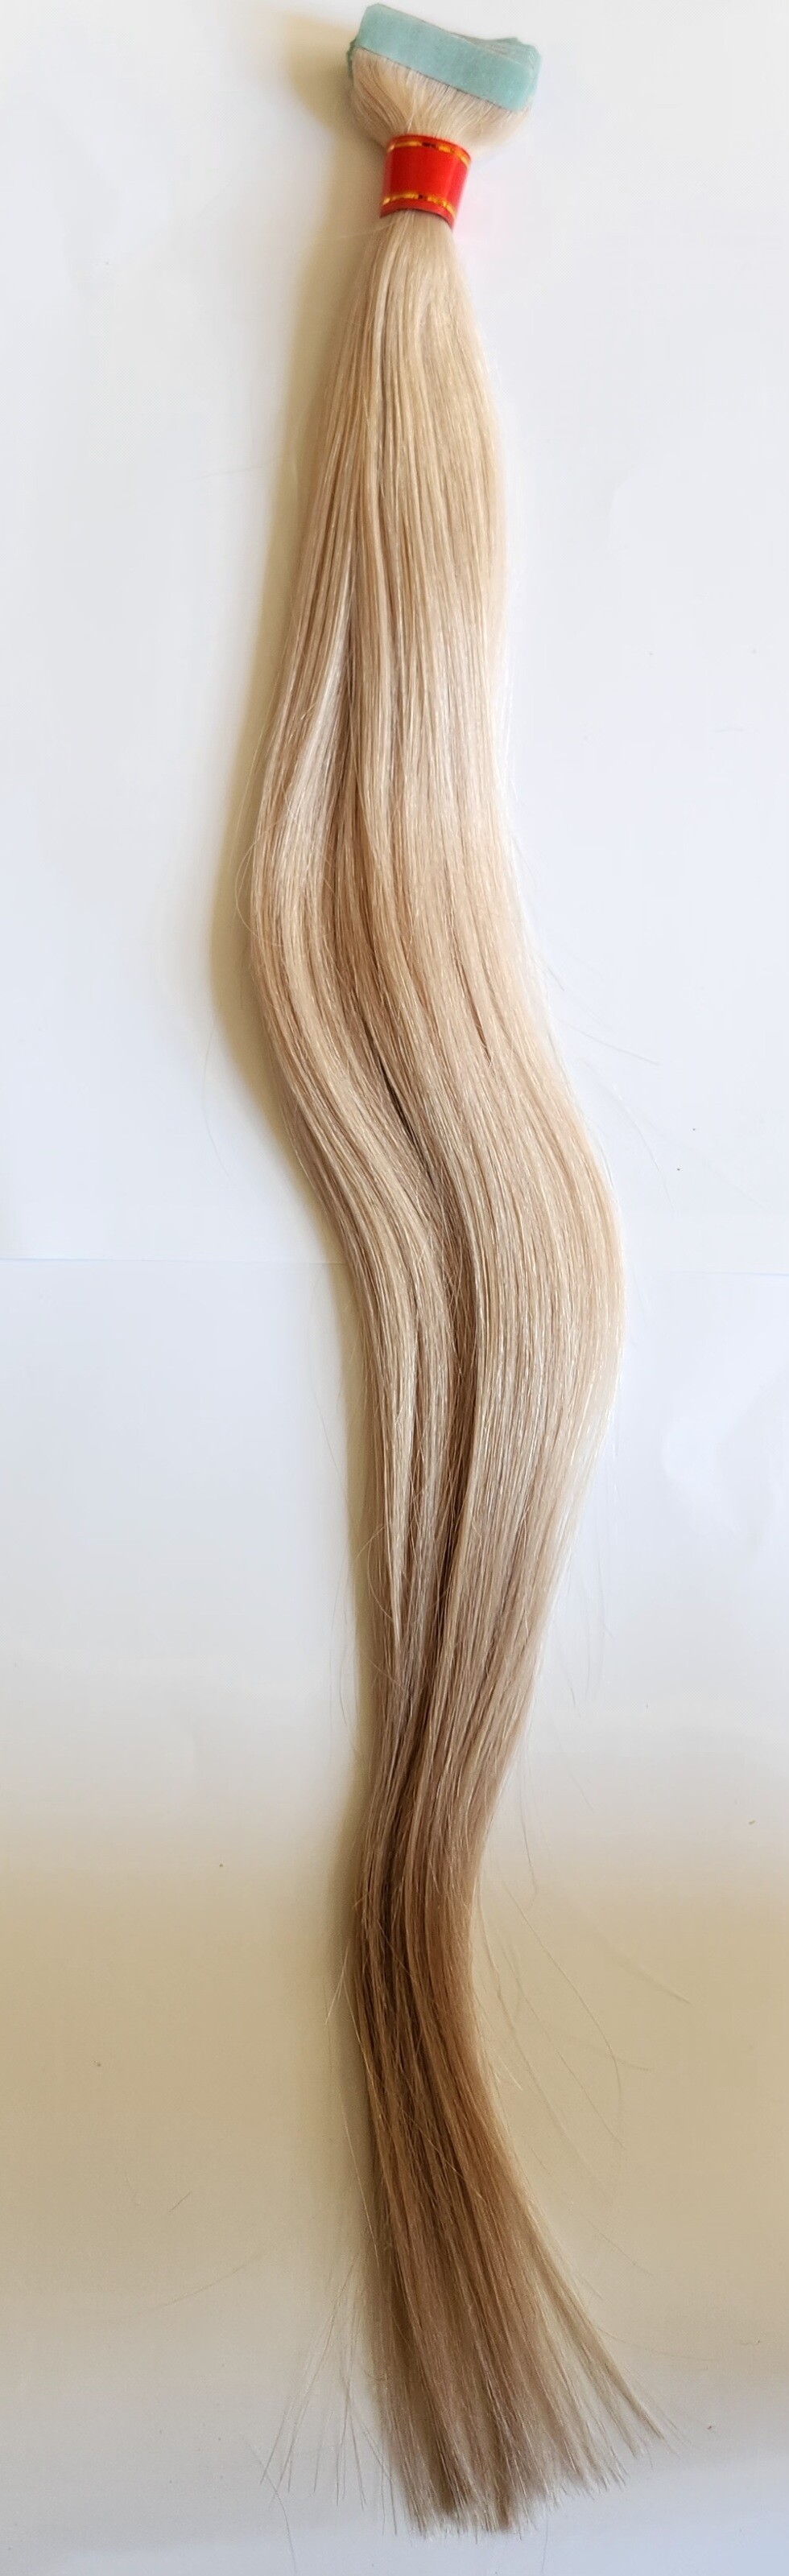 REMY FILIPINO HAIR TAPE IN EXTENSIONS 20PCS 50G 60 PLATINUM BLONDE